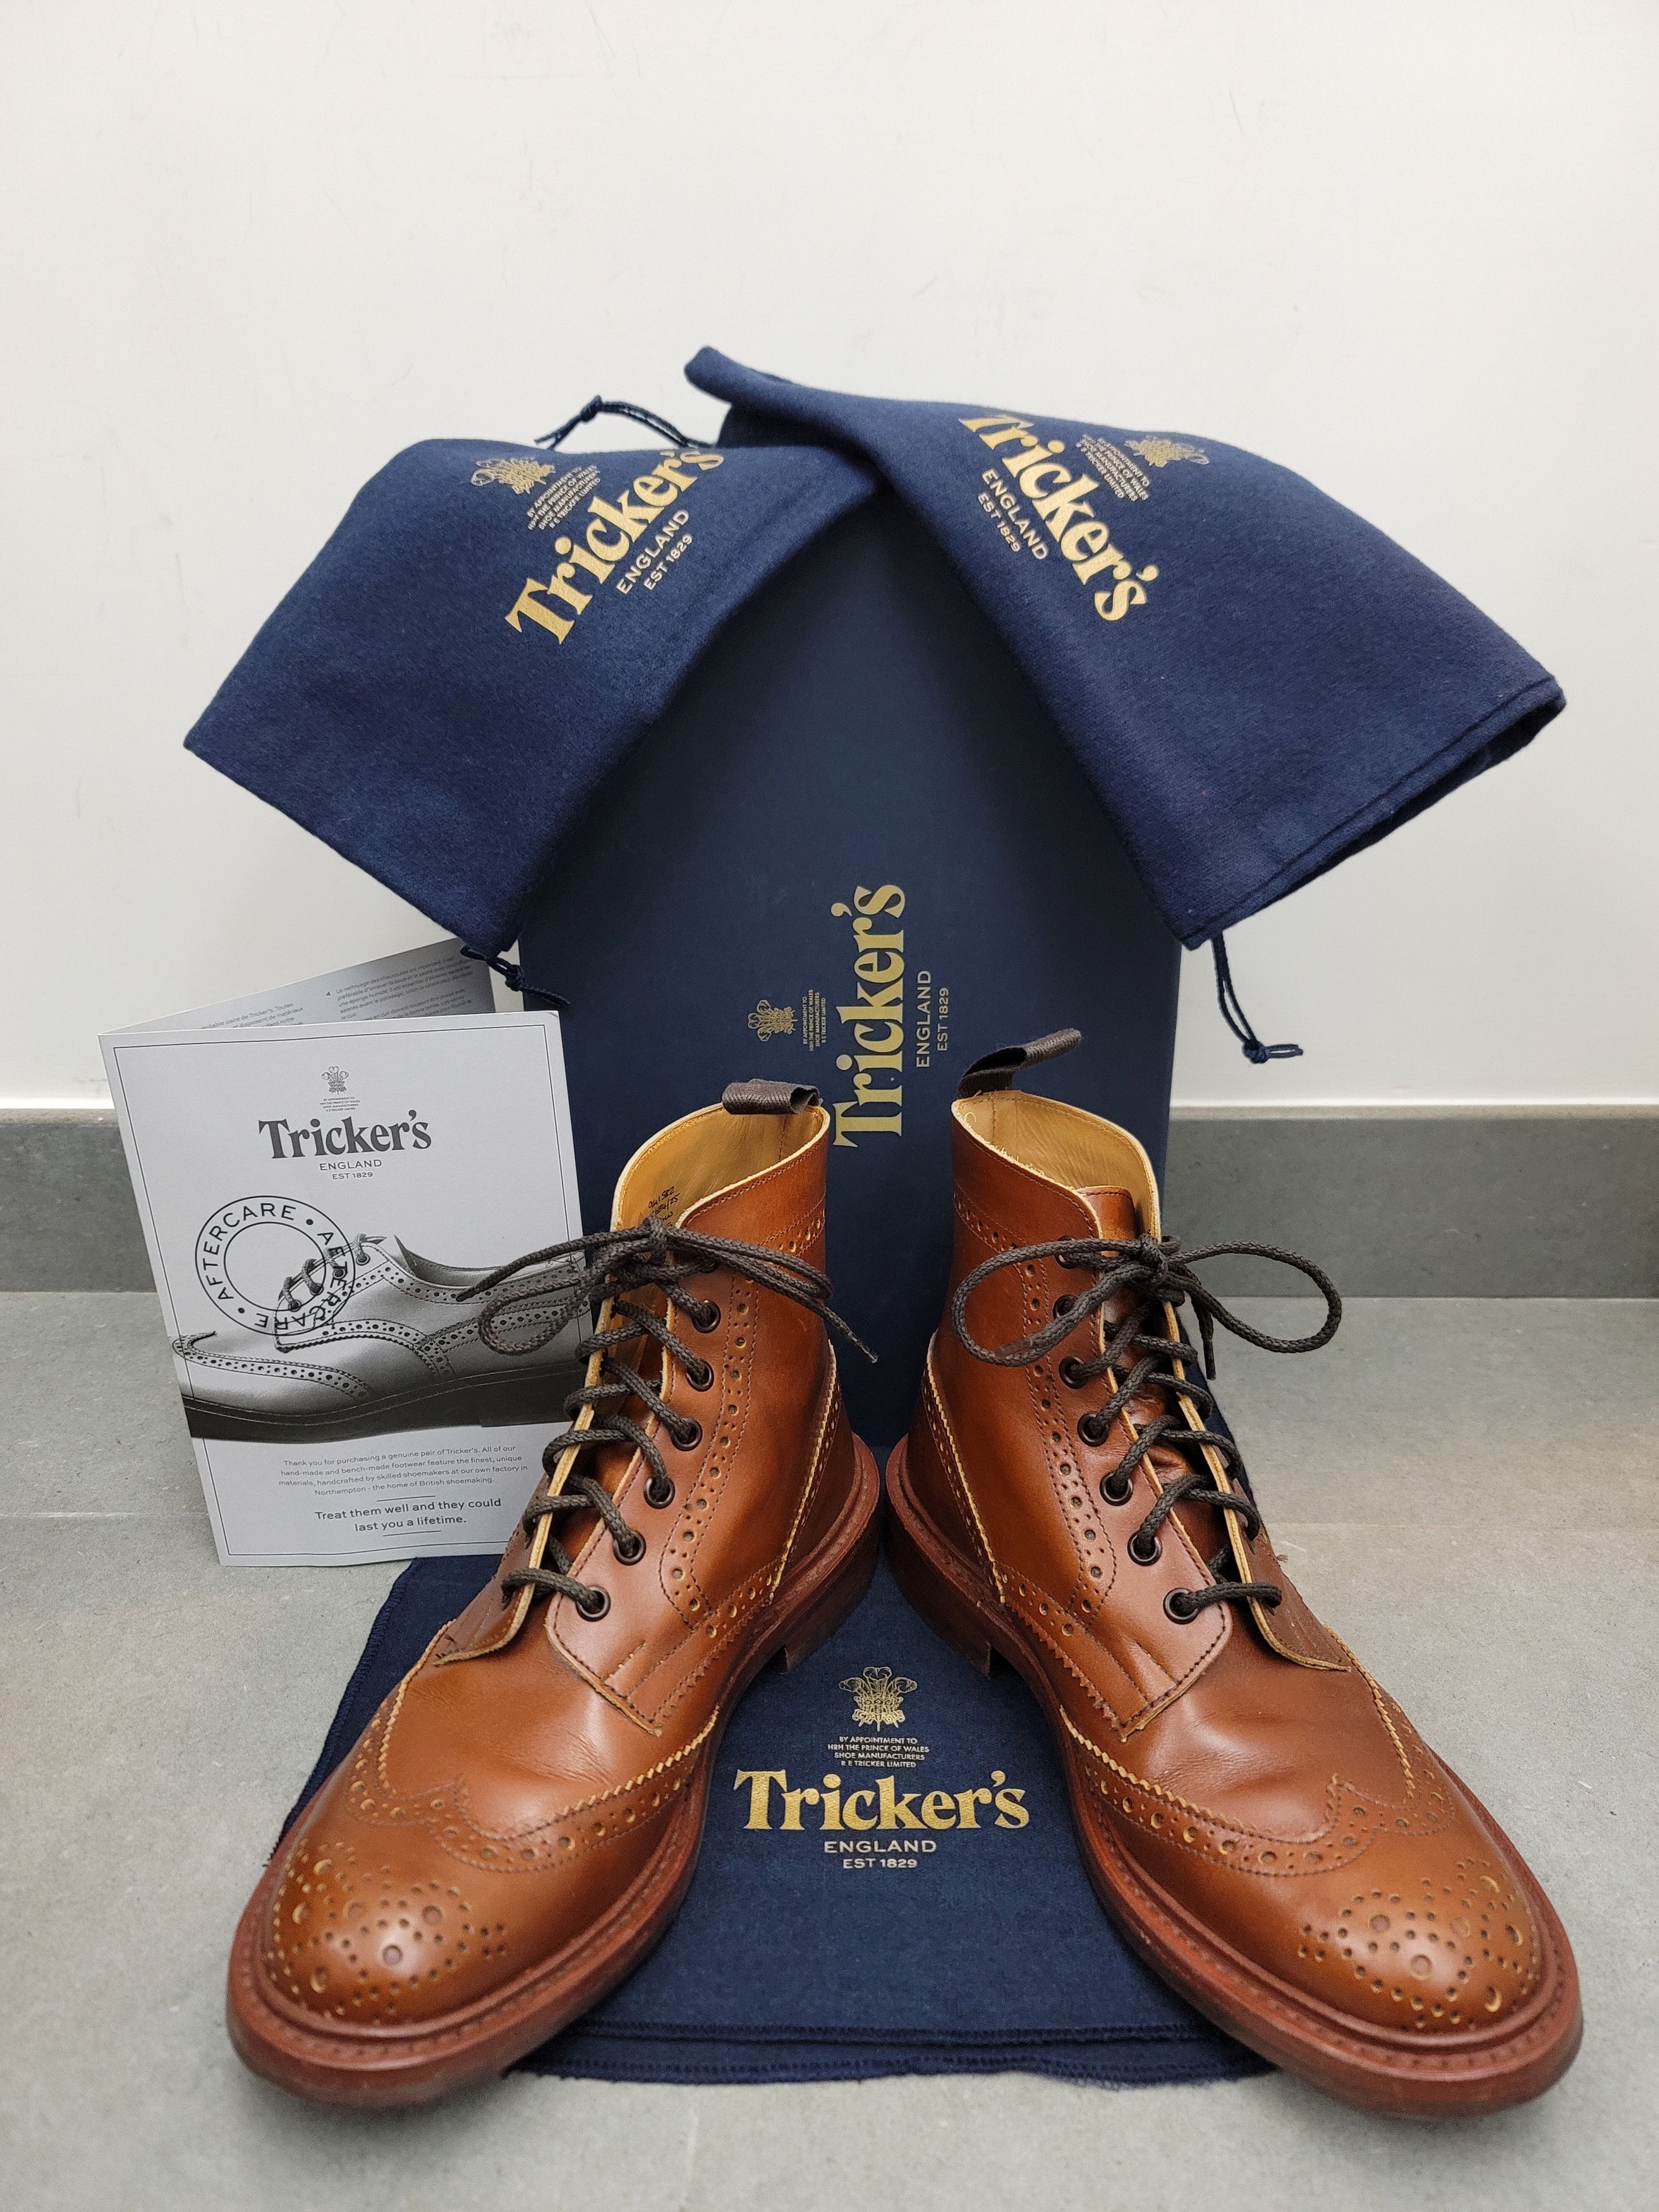 Trickers Stow Country Boot Dainite Sole | Grailed